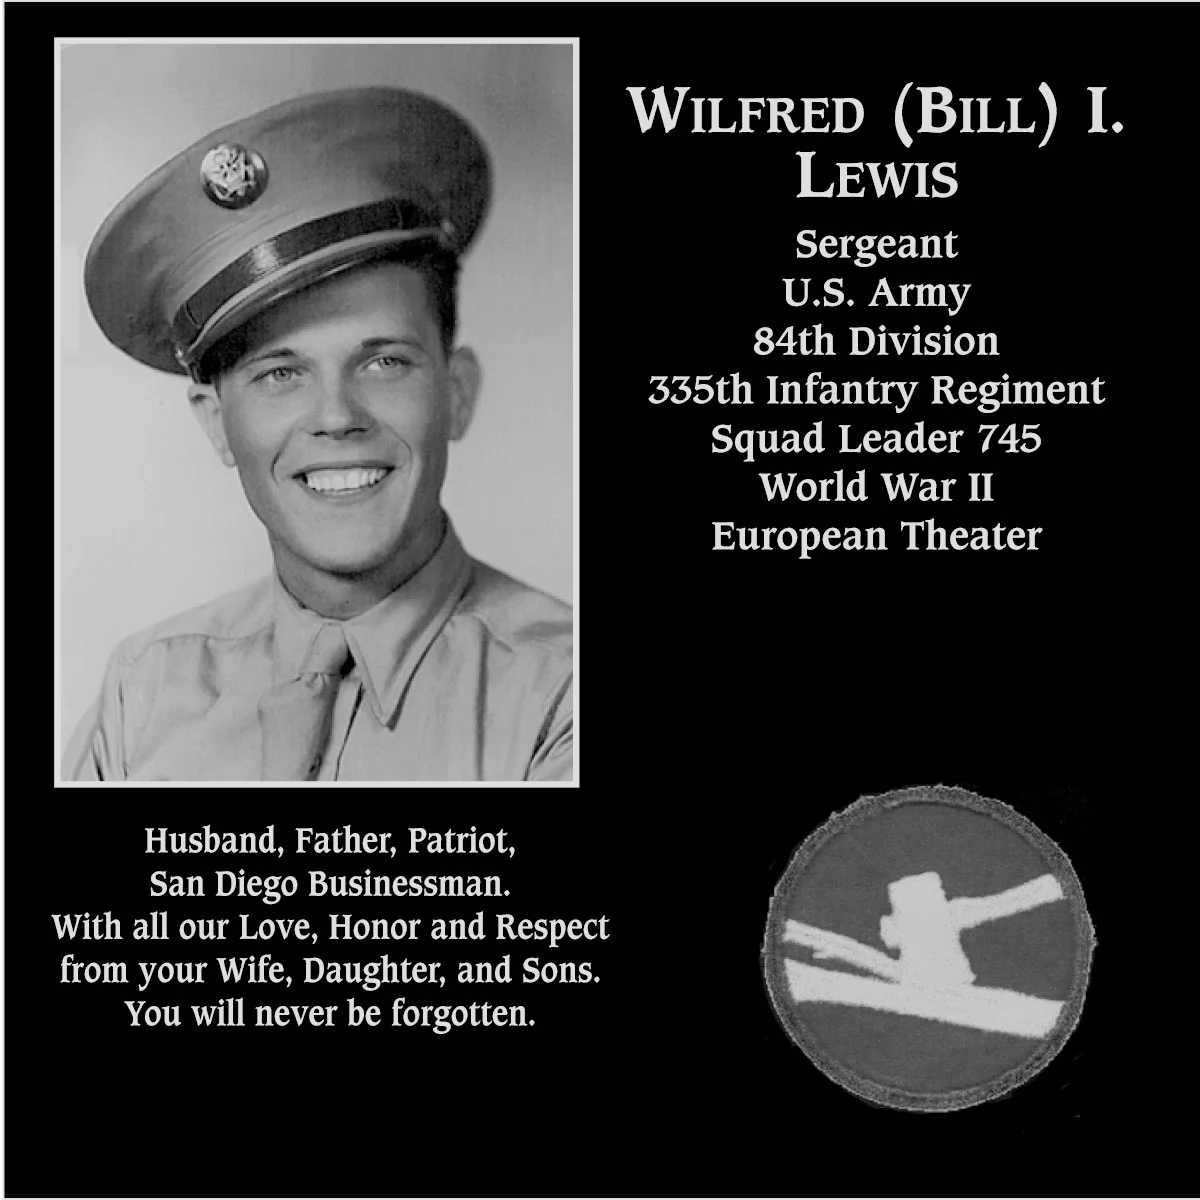 Wilfred I “Bill” Lewis